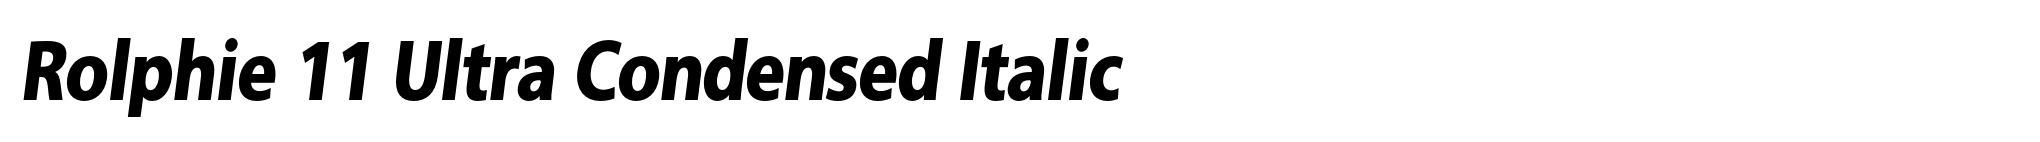 Rolphie 11 Ultra Condensed Italic image